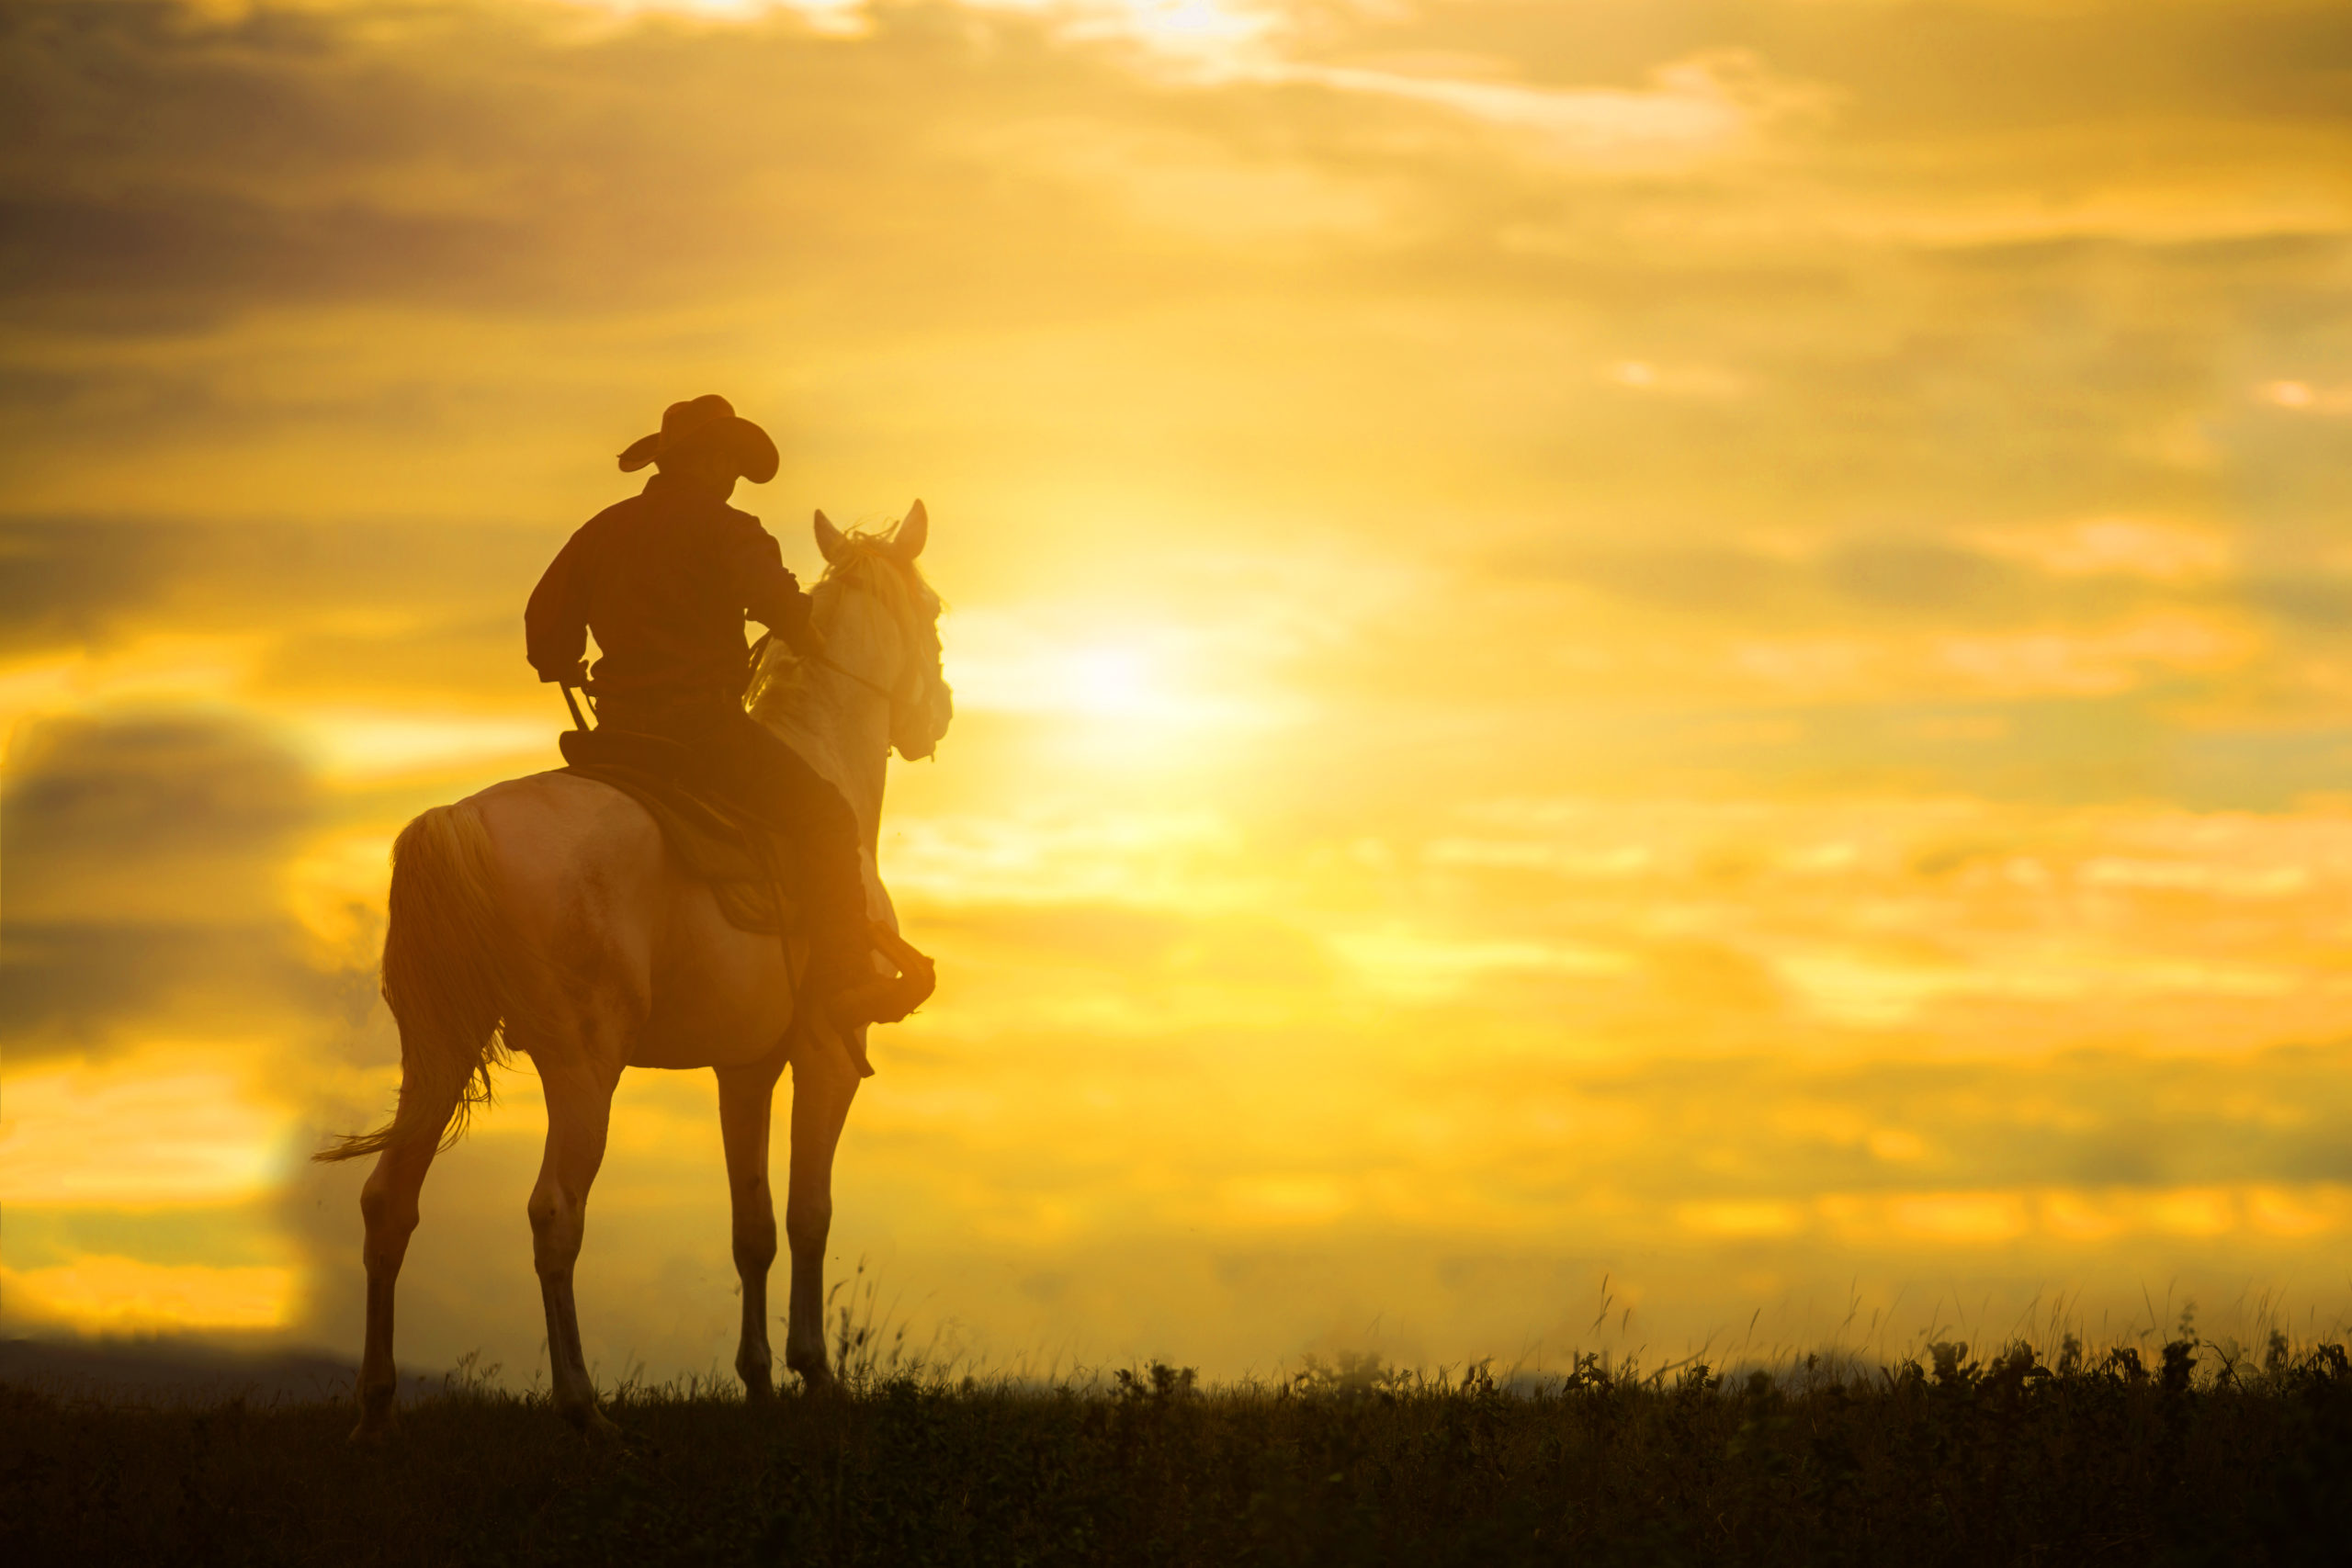 A person riding a horse in a field at sunset